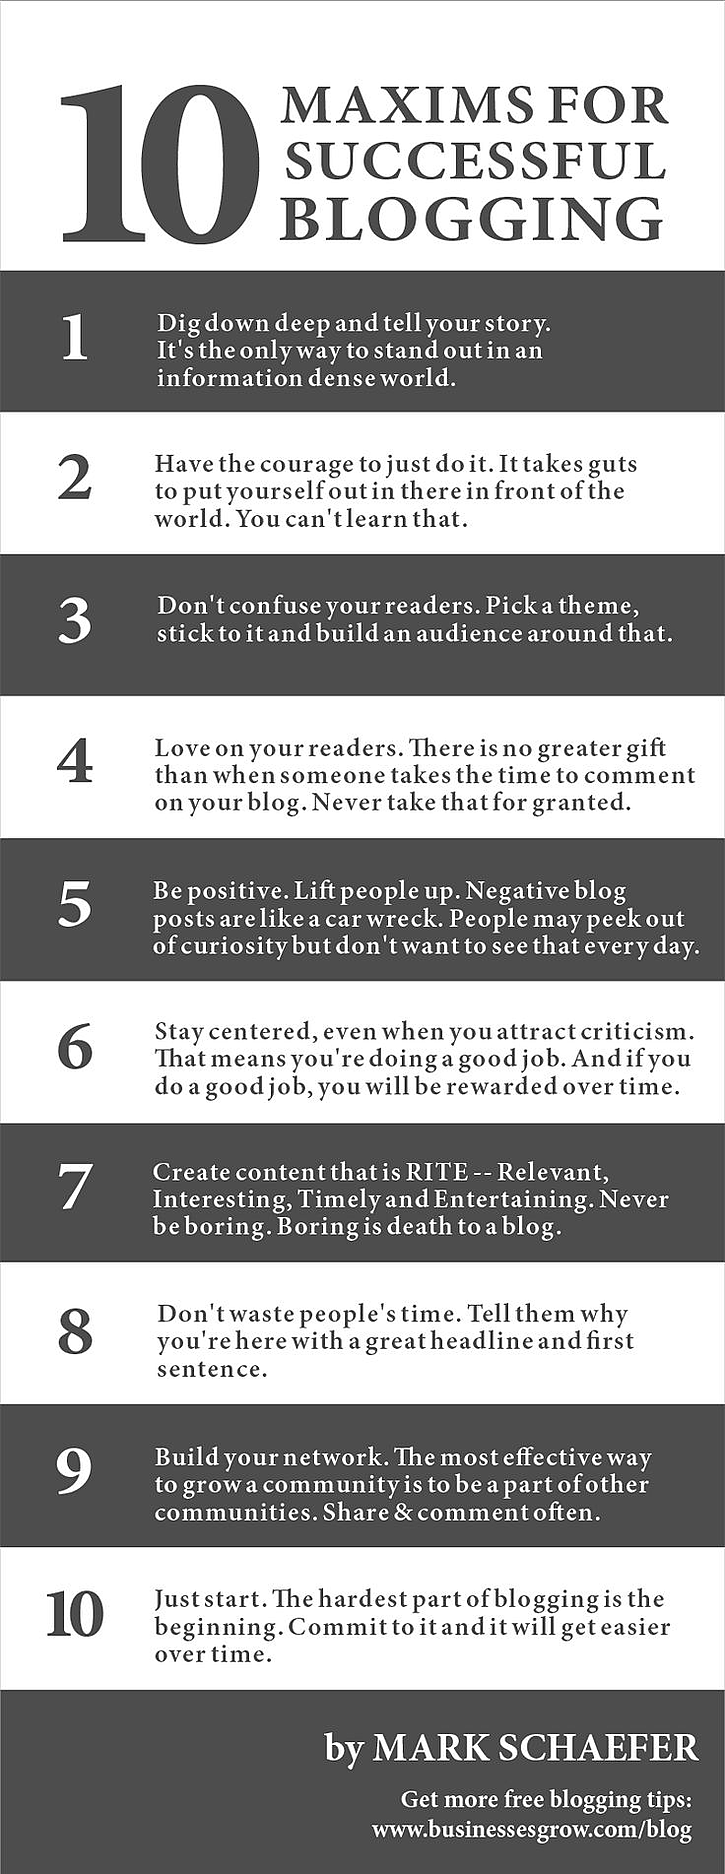 Best business blogs are improved by using the 10 maxims